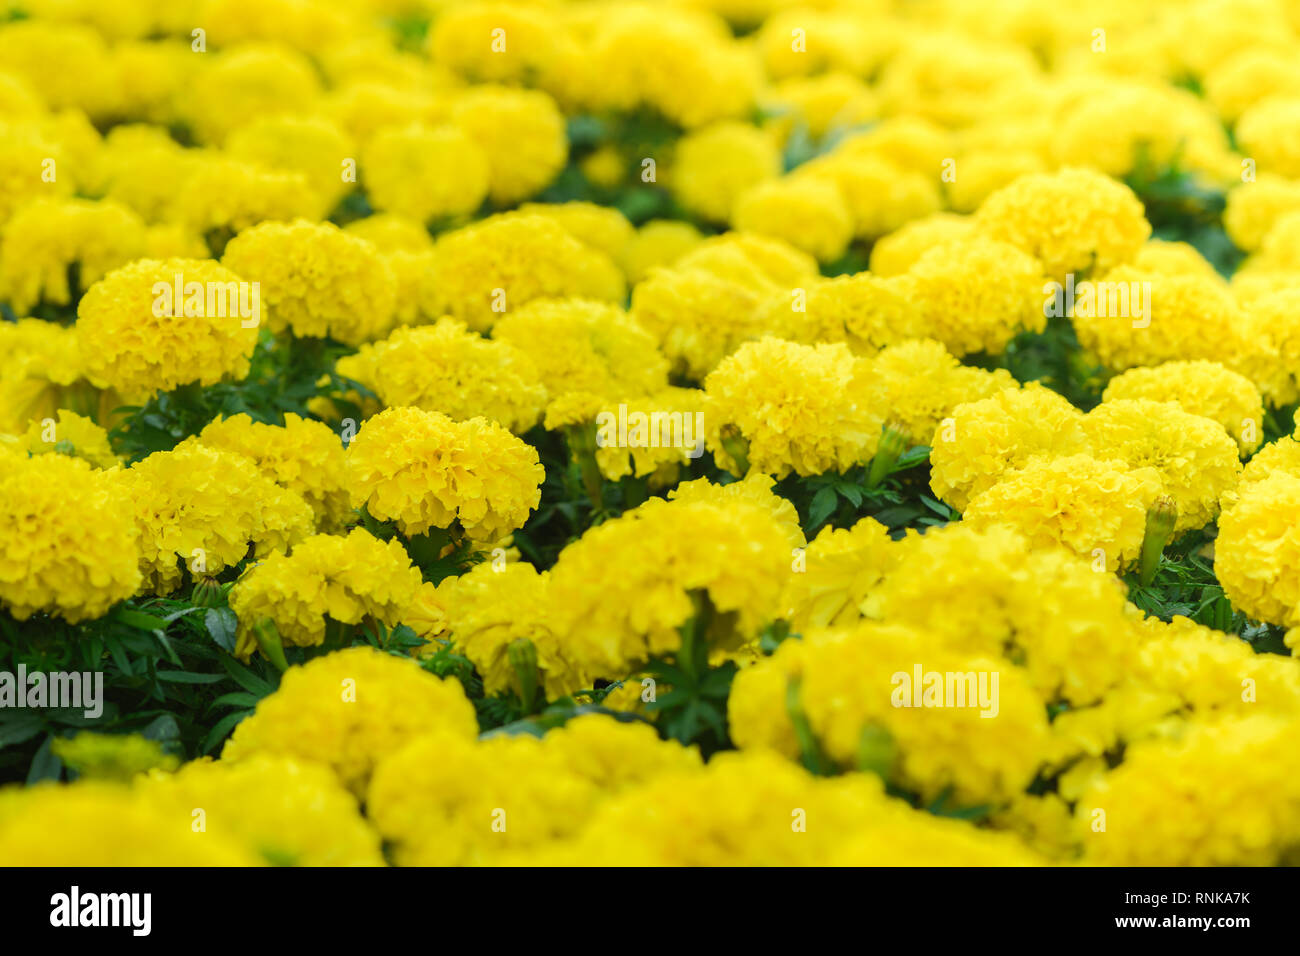 Close up bright yellow marigolds are blooming in the garden., flower background Stock Photo